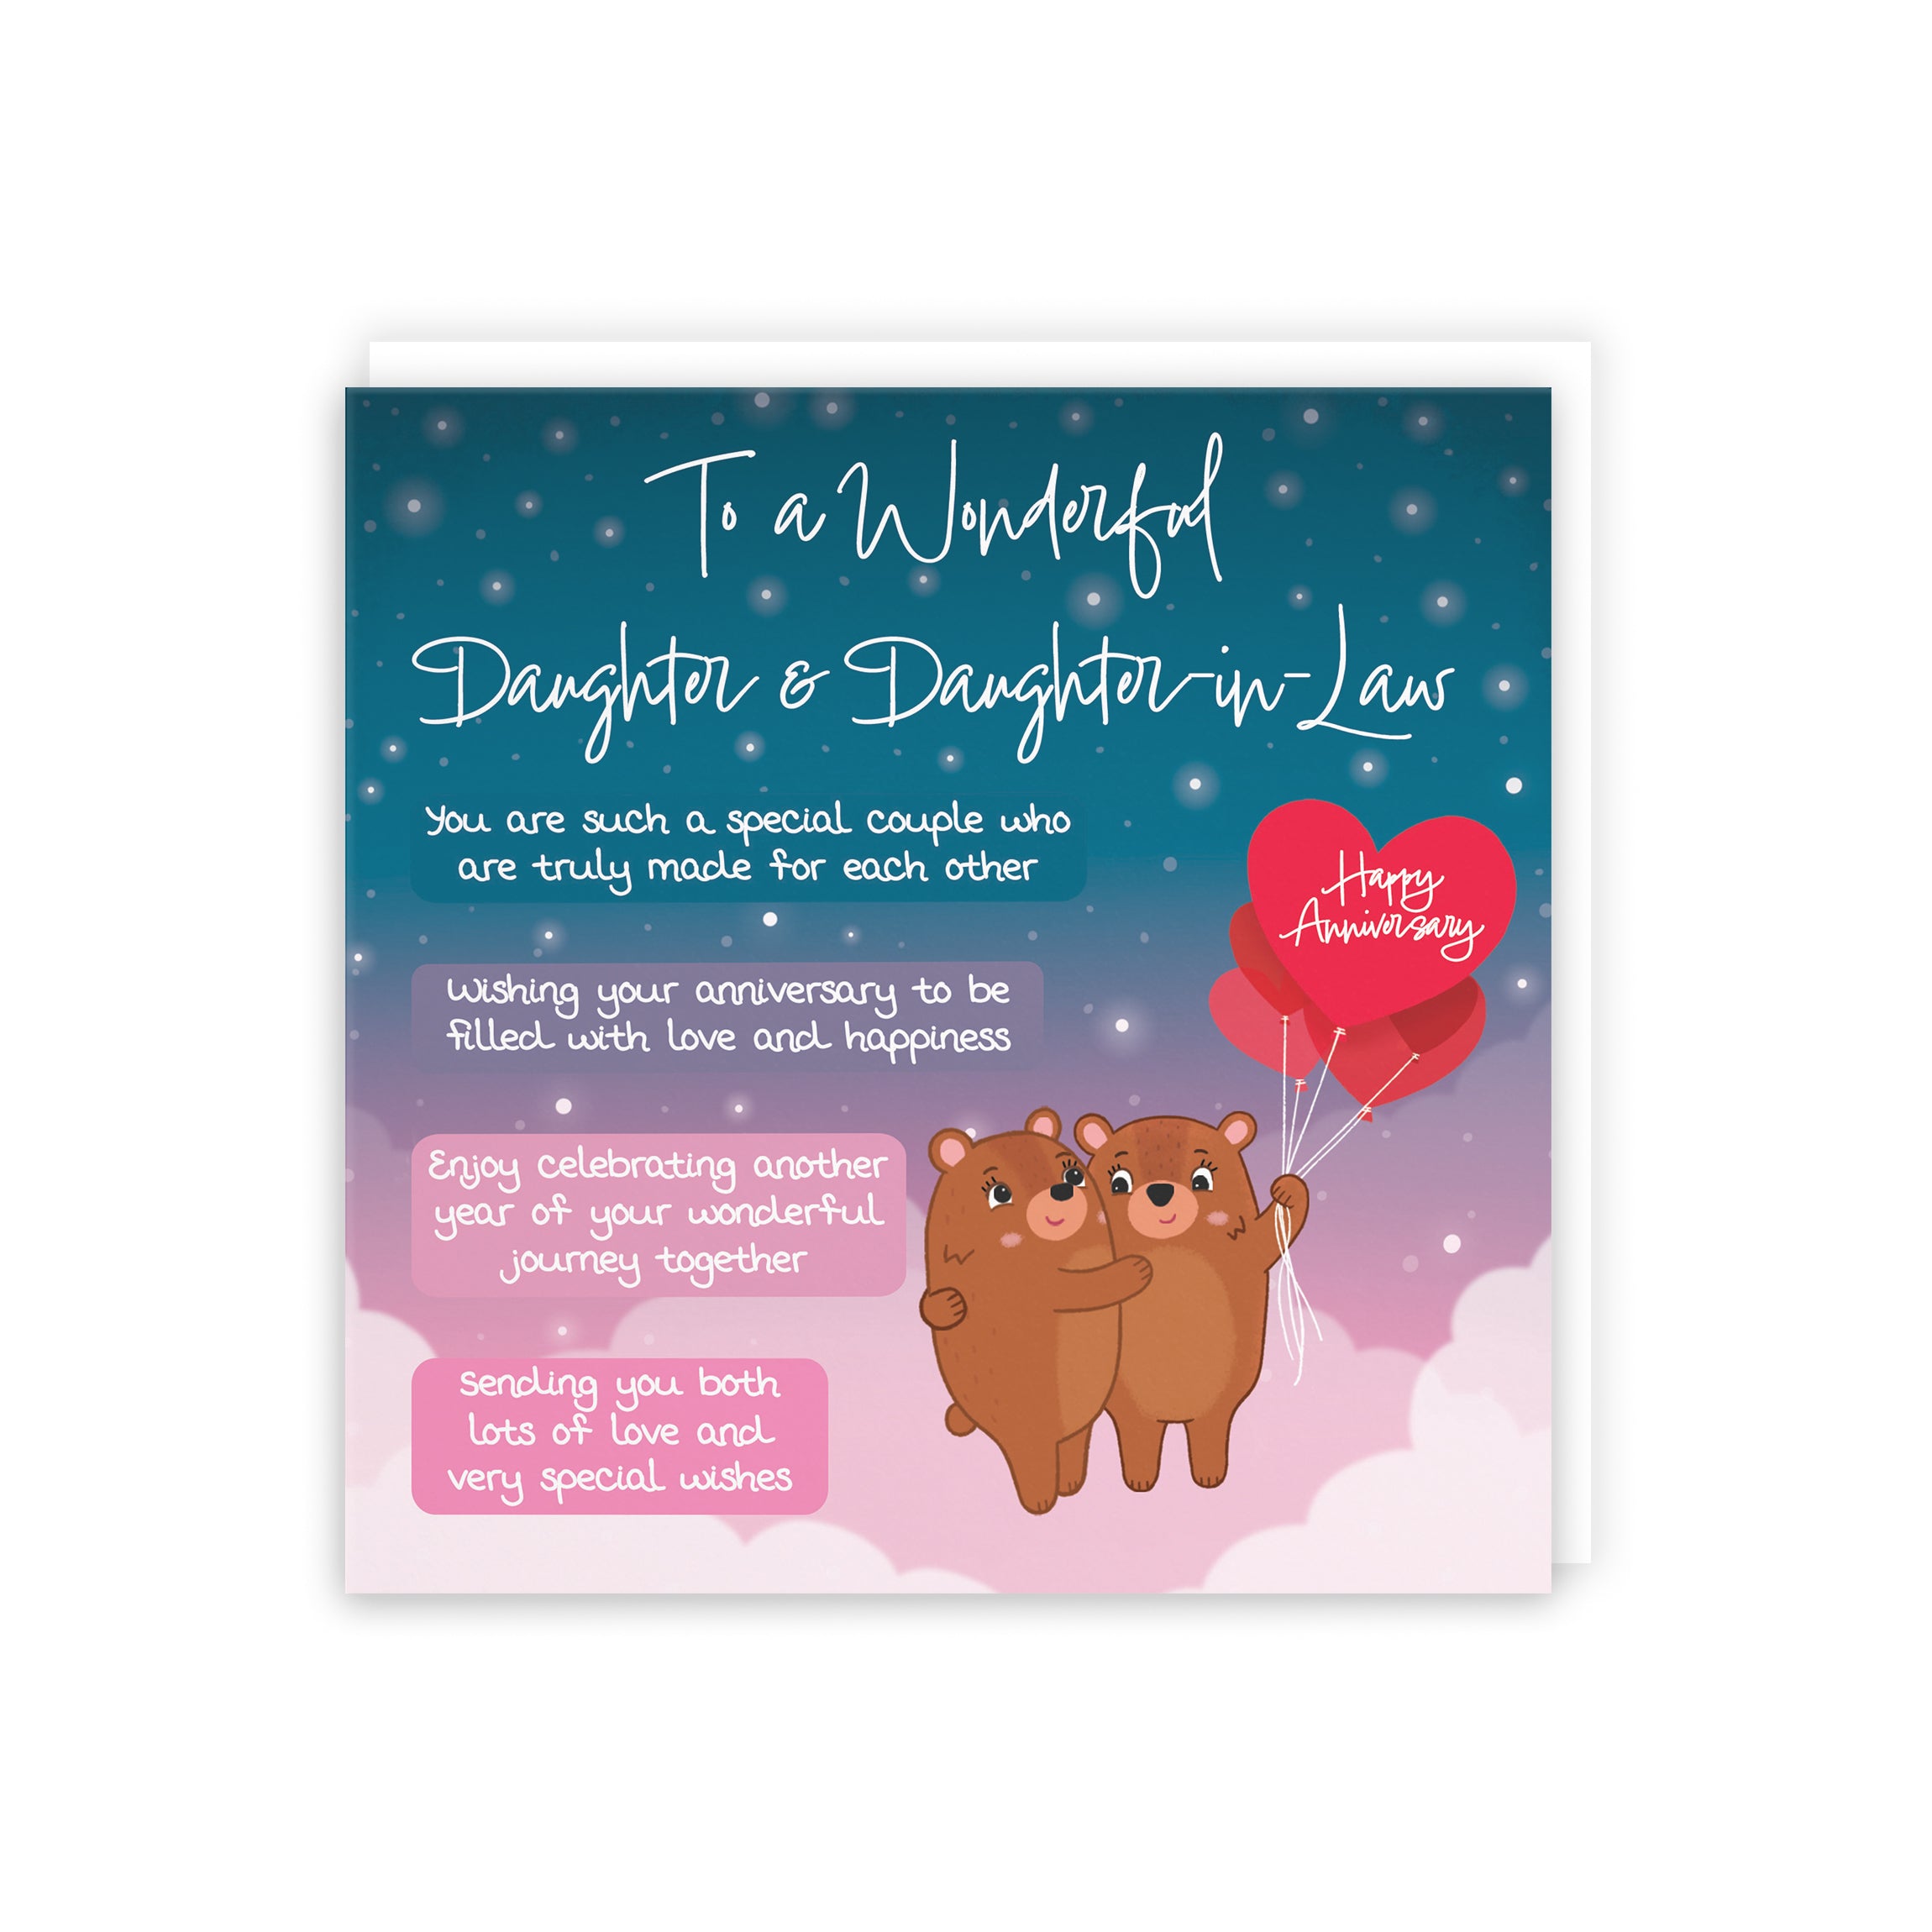 Daughter And Daughter In Law Anniversary Card Starry Night Cute Bears